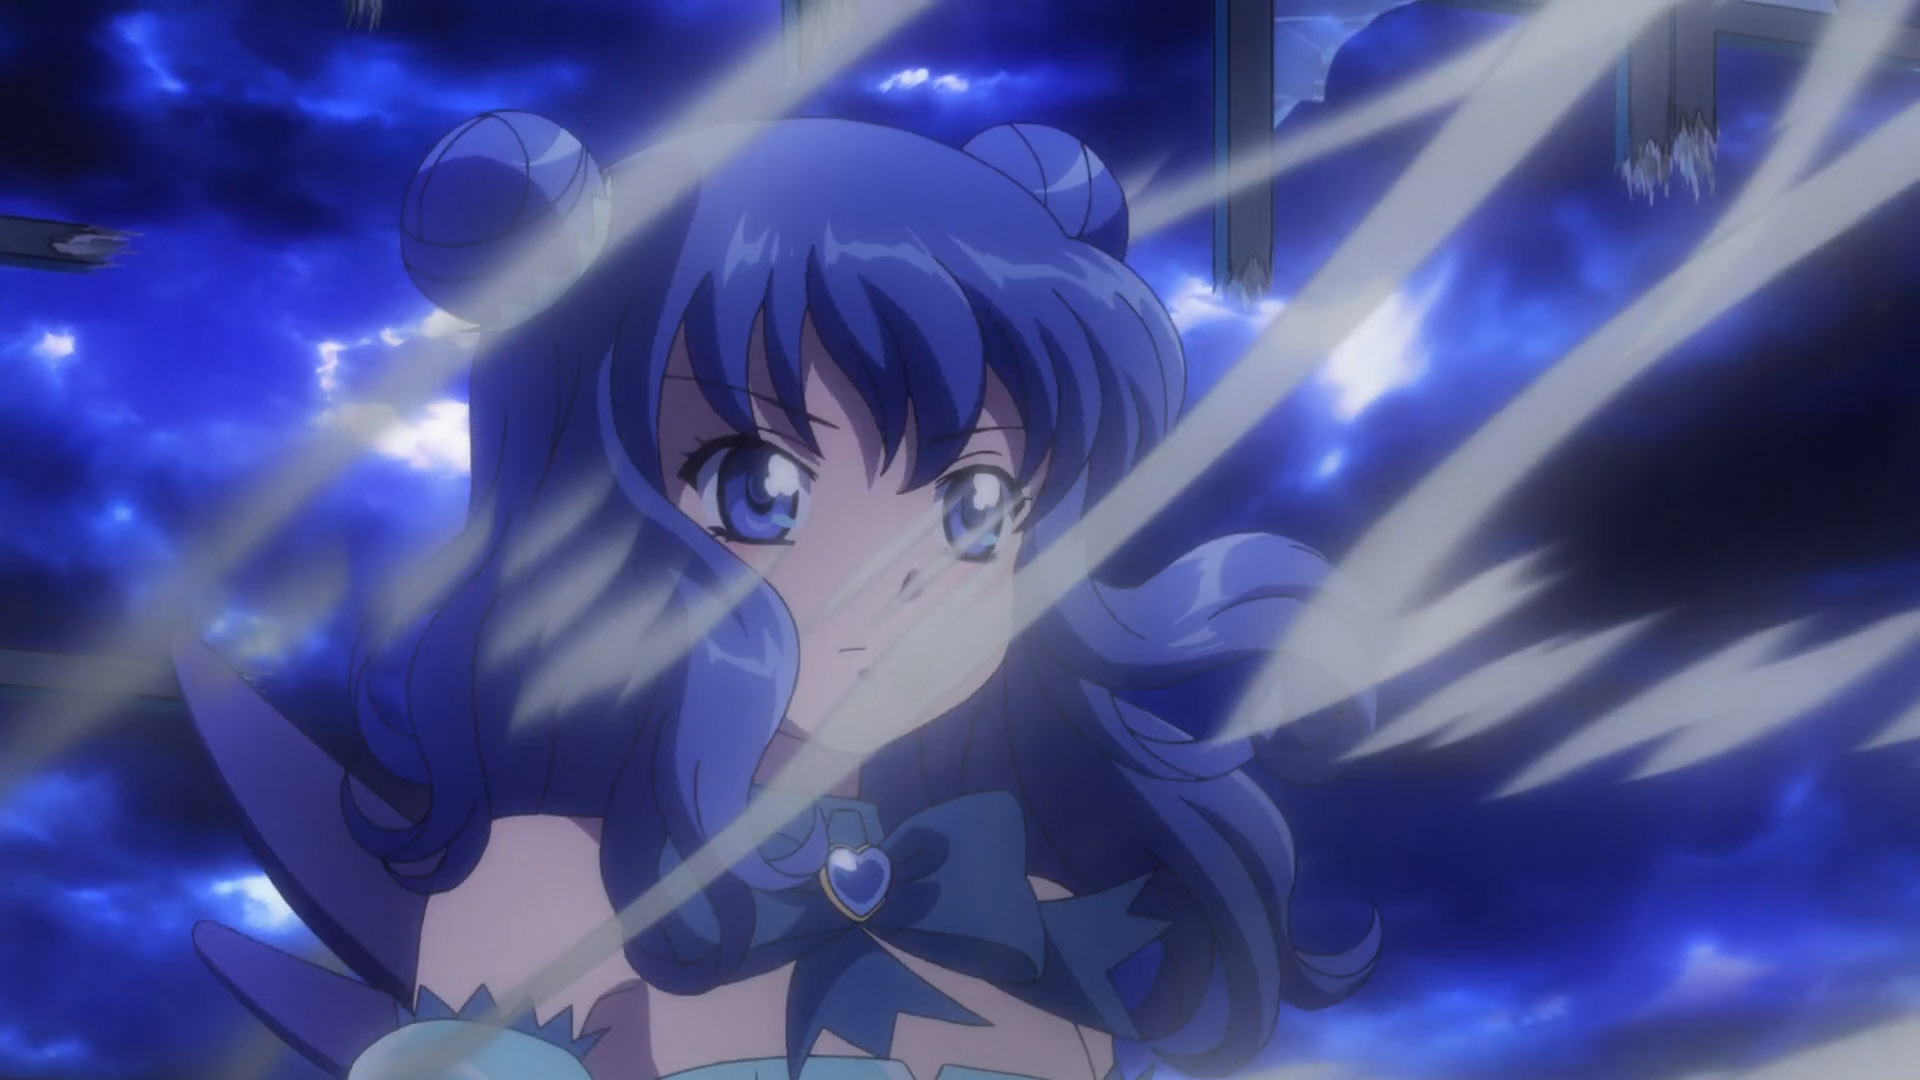 Tokyo Mew Mew New Anime Reveals 2nd Promo Video, July 6 Premiere